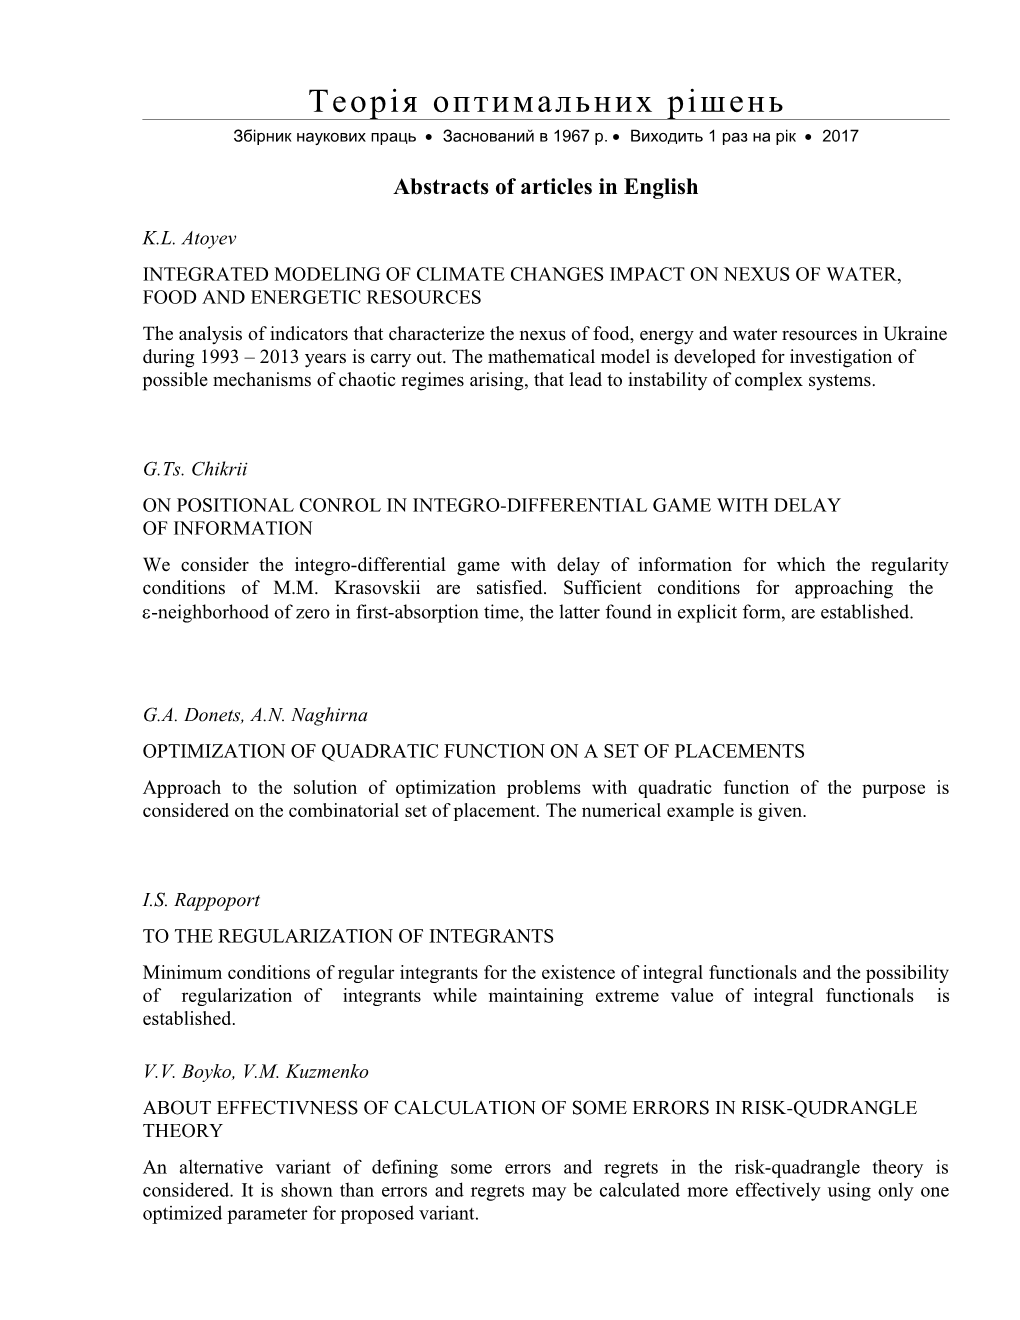 Abstracts of Articles in English